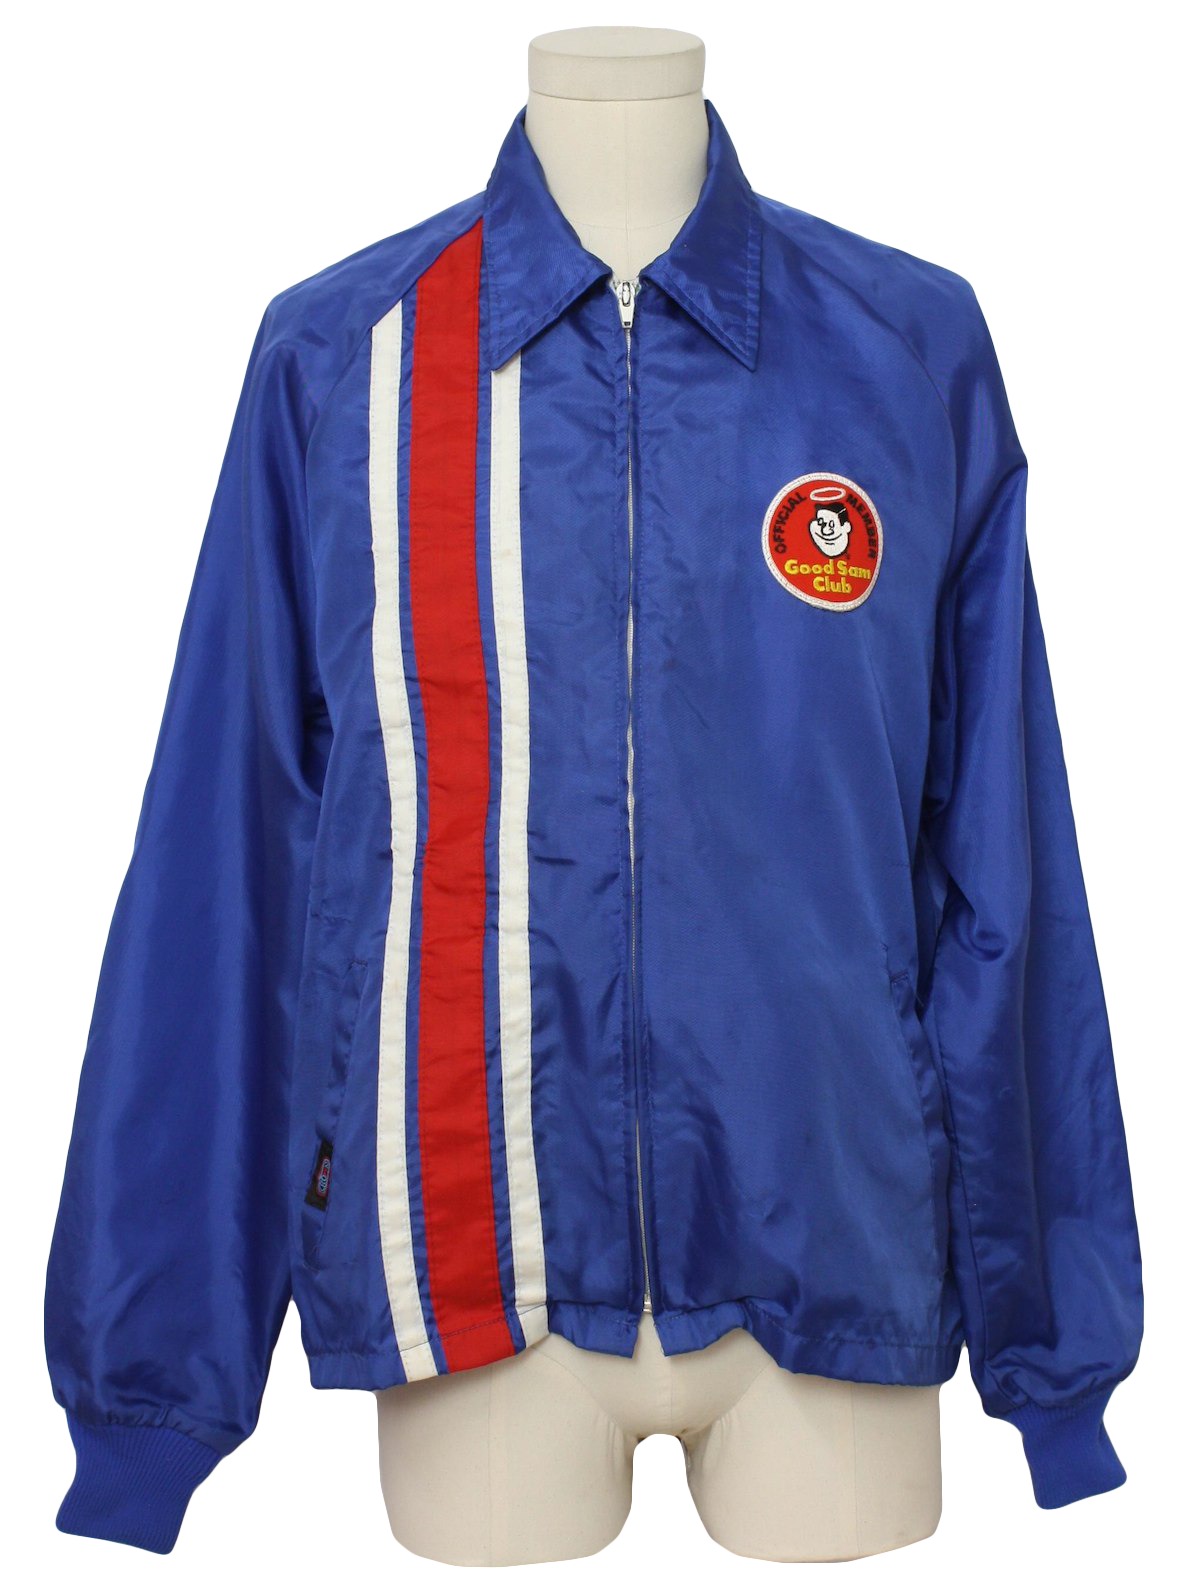 Retro 1970's Jacket (Crown) : 70s -Crown- Mens sapphire blue, red and ...